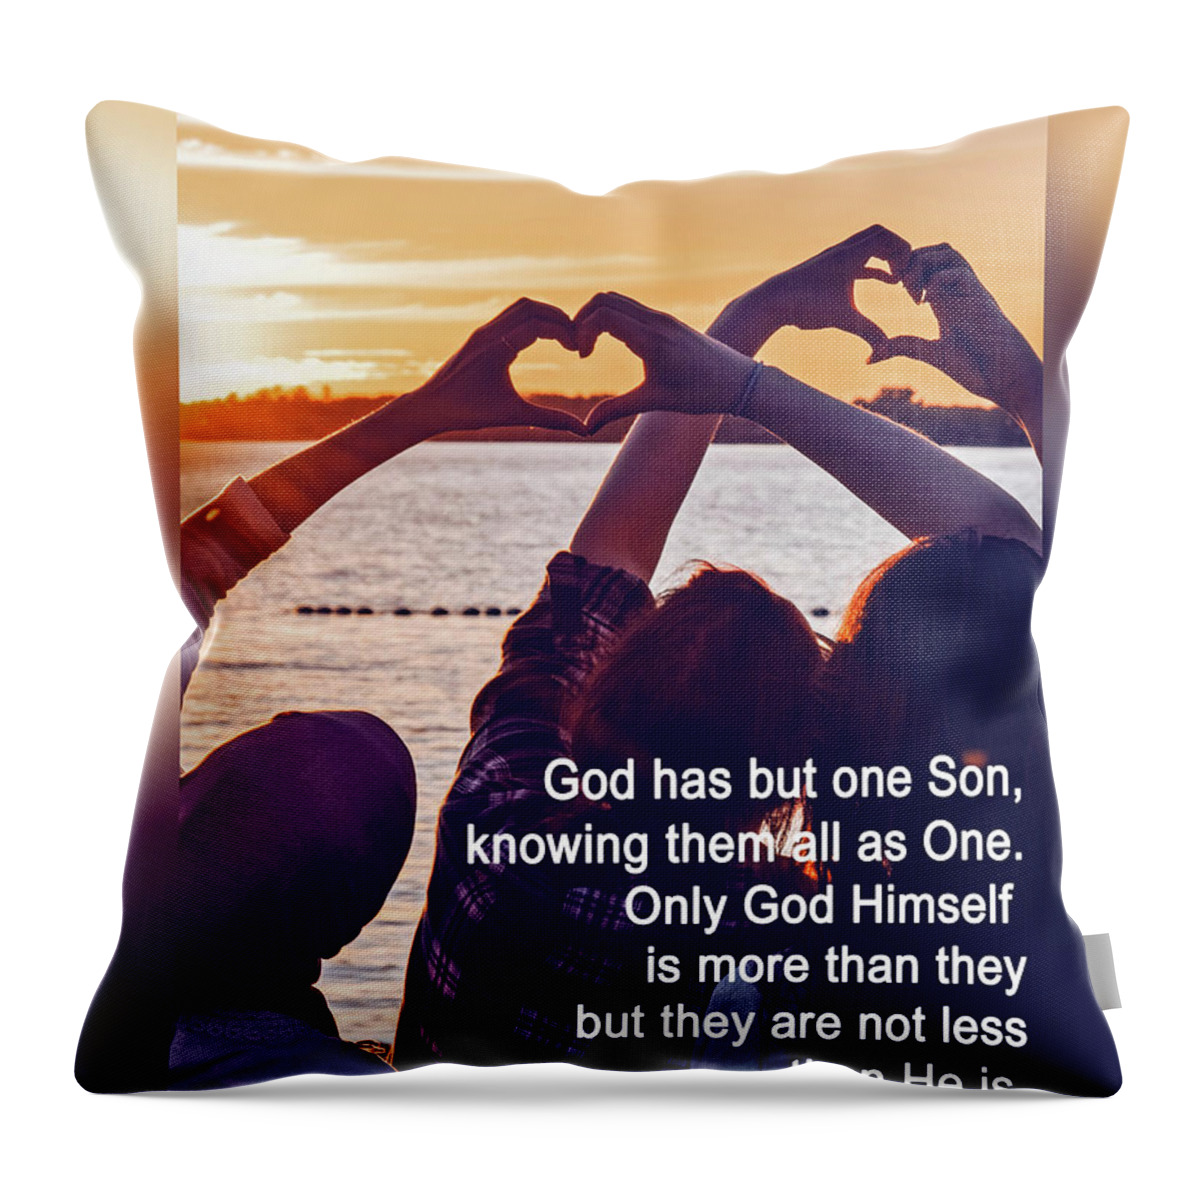 Acim Throw Pillow featuring the digital art A Course In Miracles 10 by John Vincent Palozzi